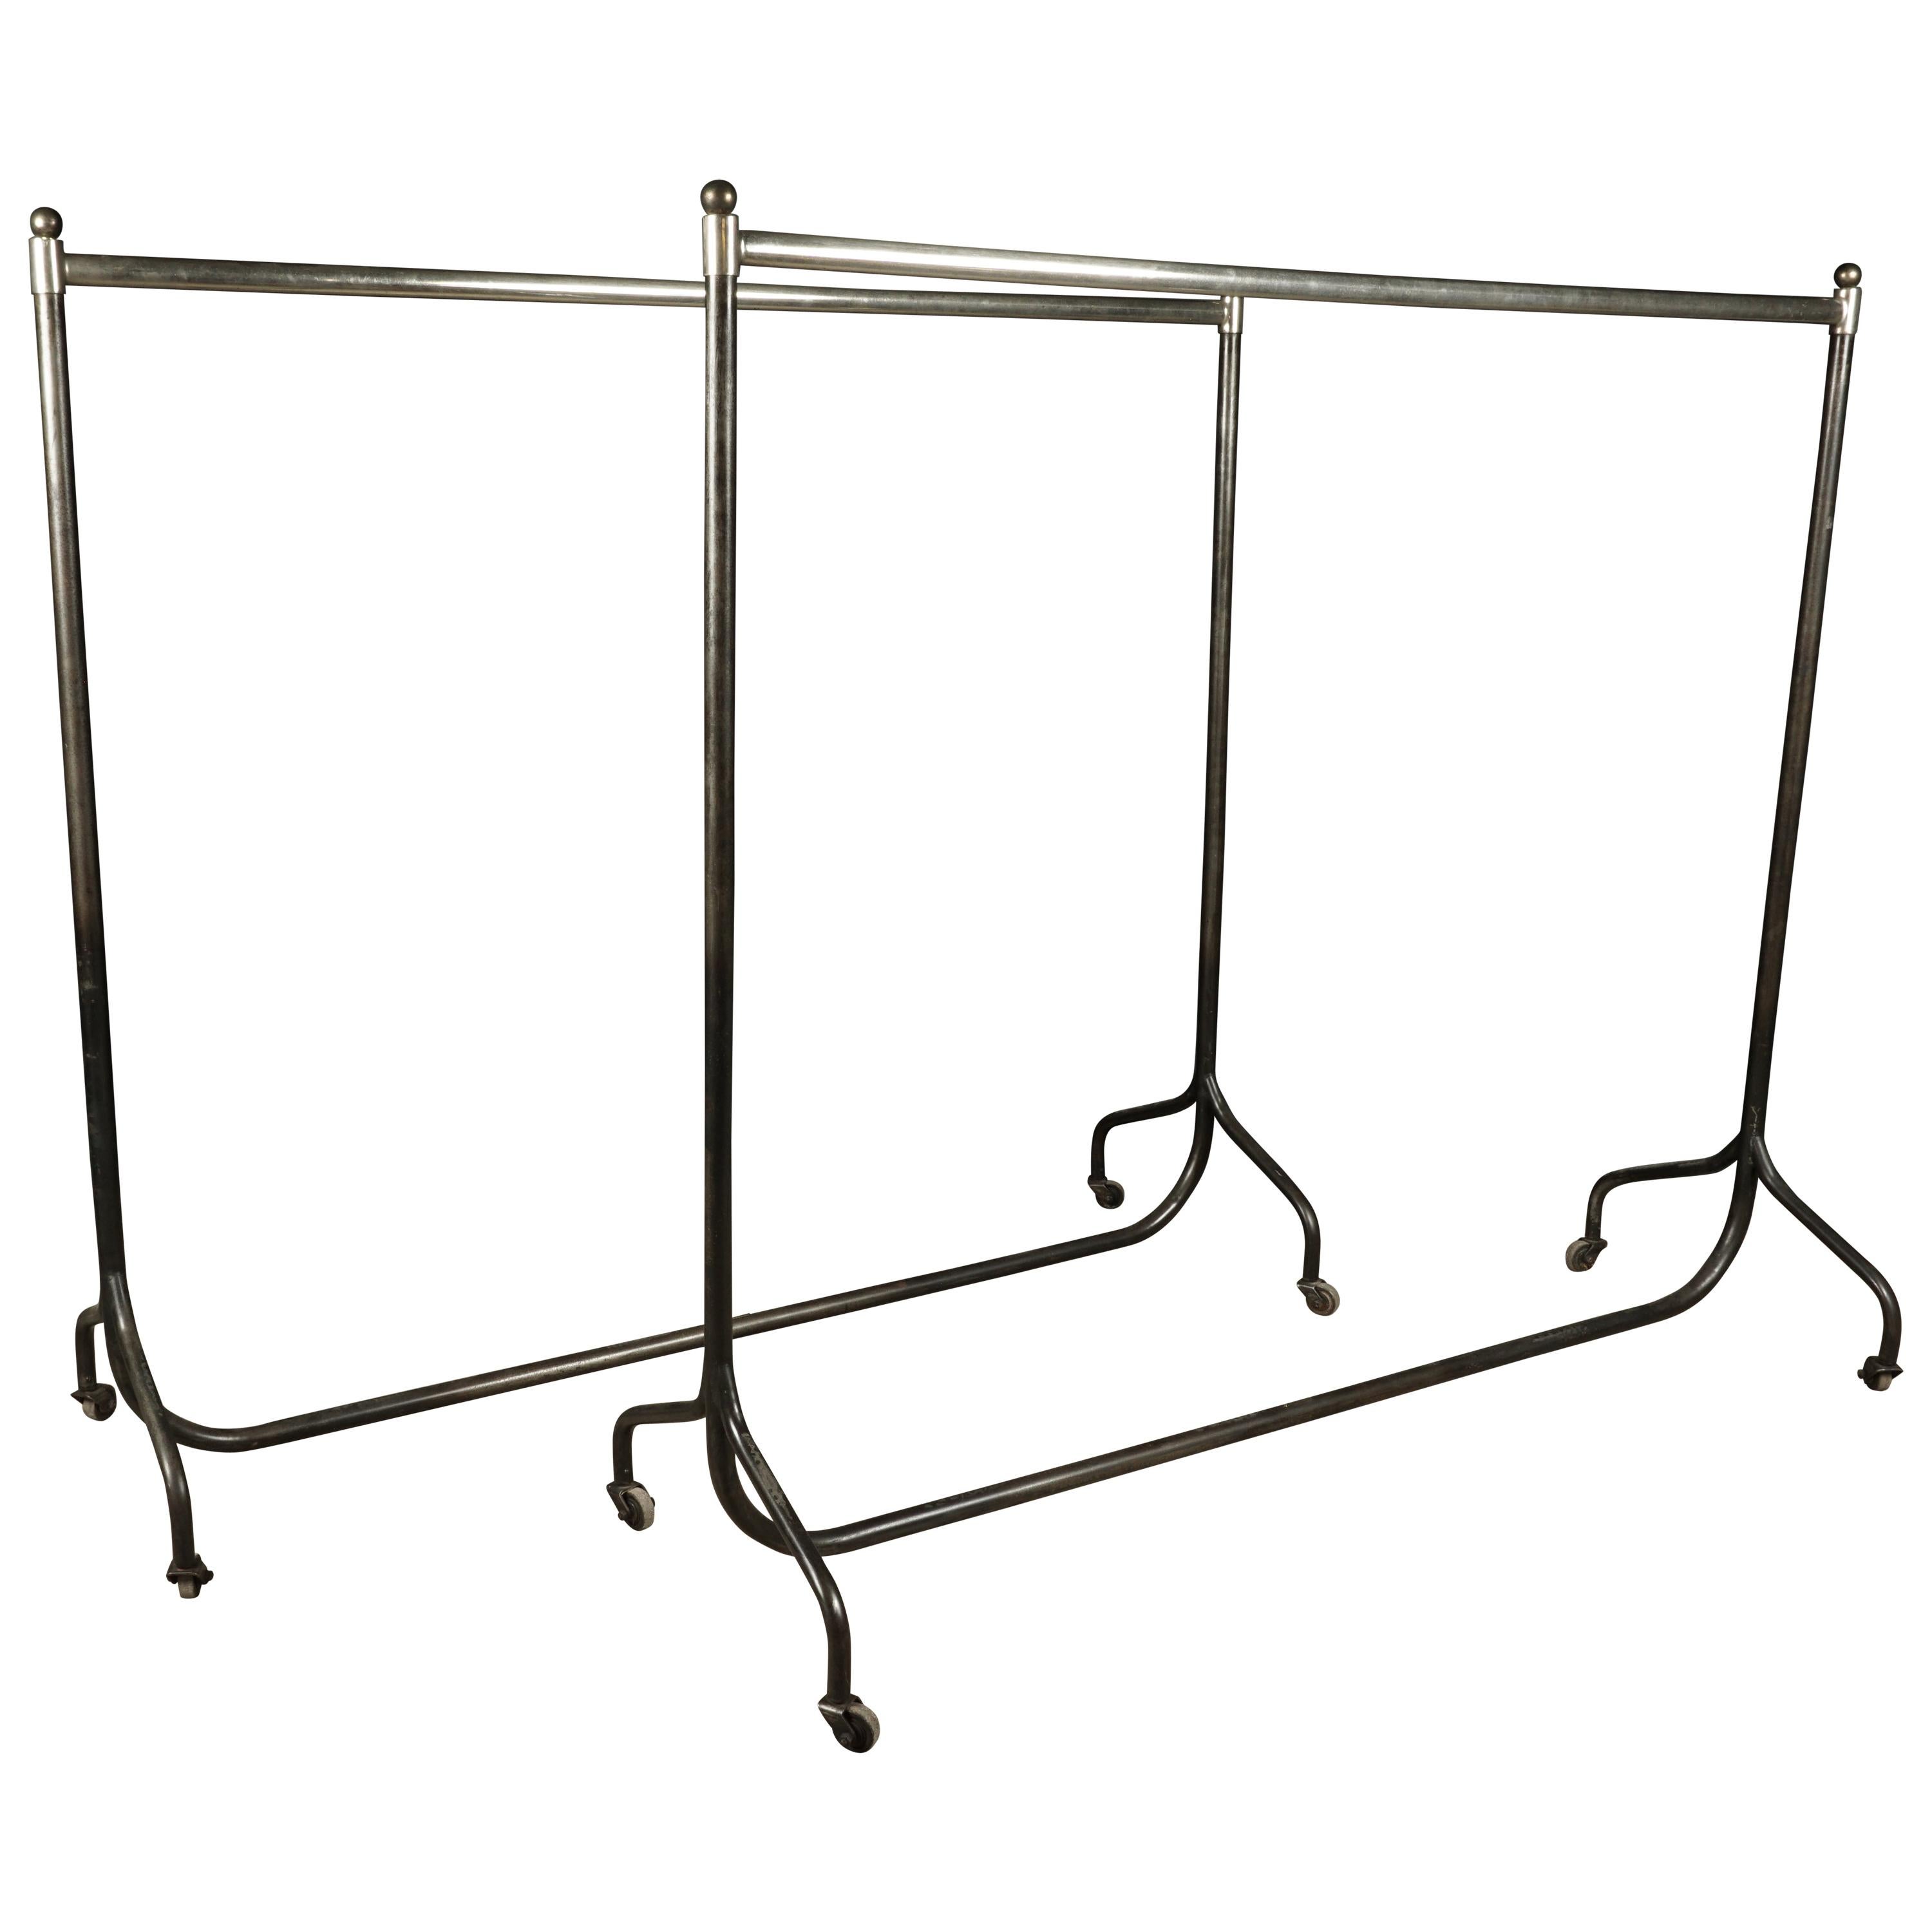 Pair of Clothing Racks from France, Manufactured by Siegel, Paris